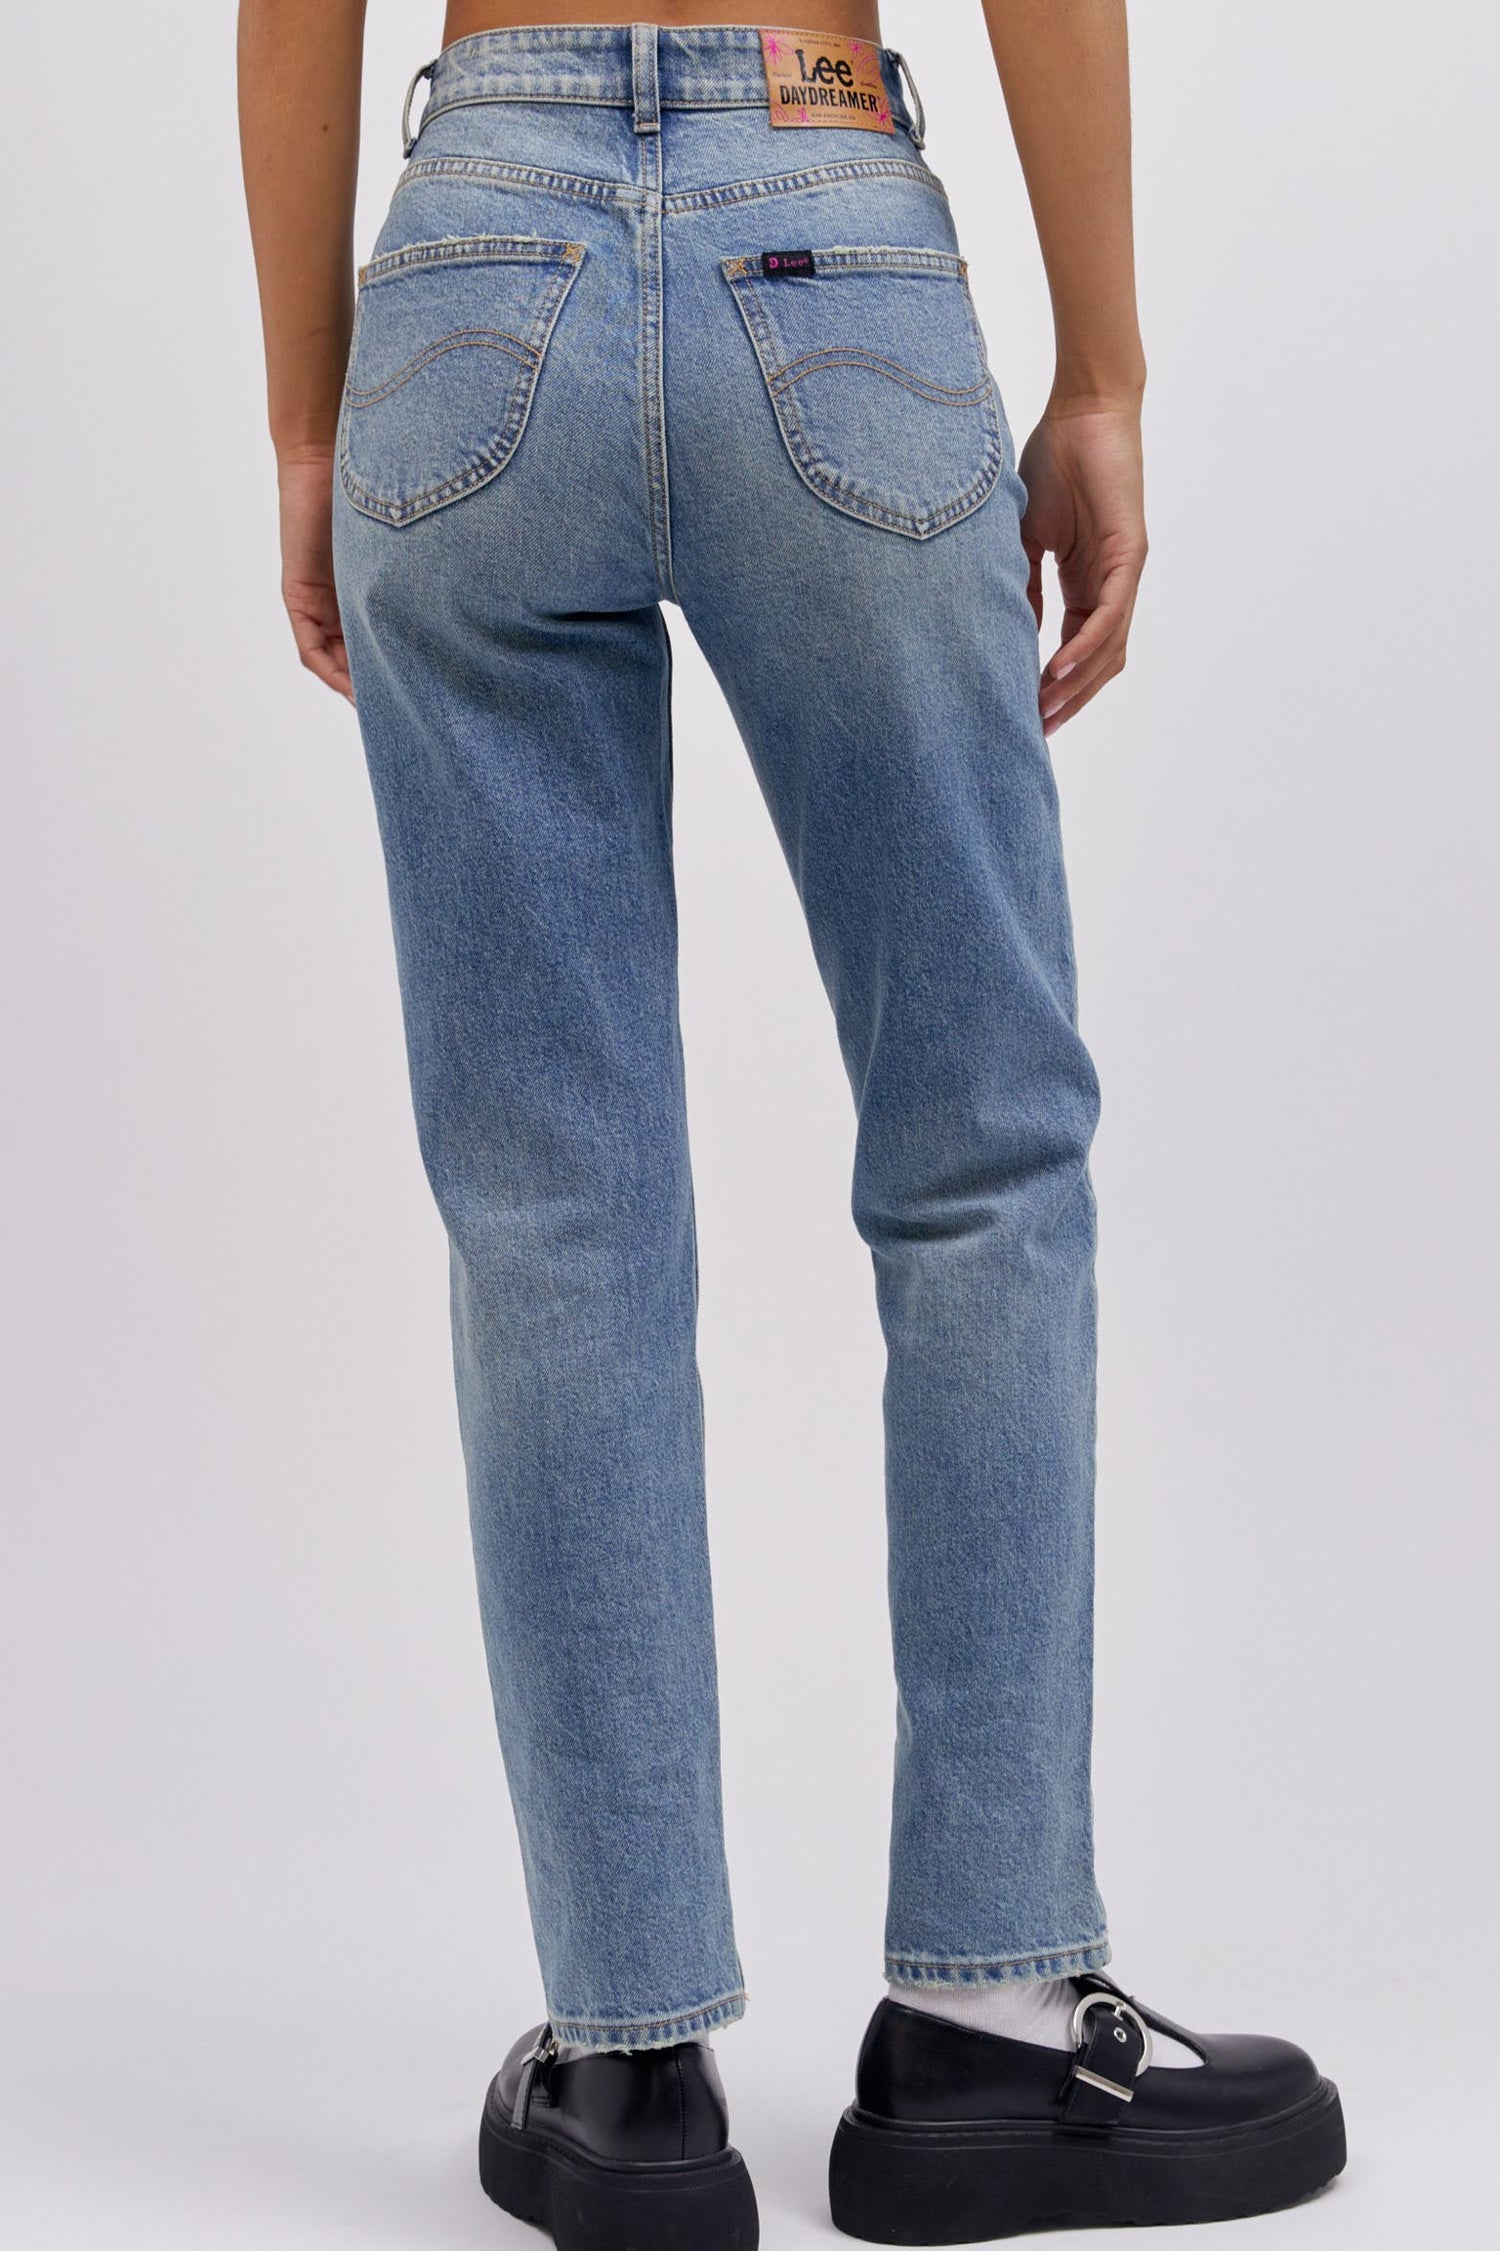 A model featuring a mid storm colored high rise and straight-legged jeans with a slim fit through the hips.